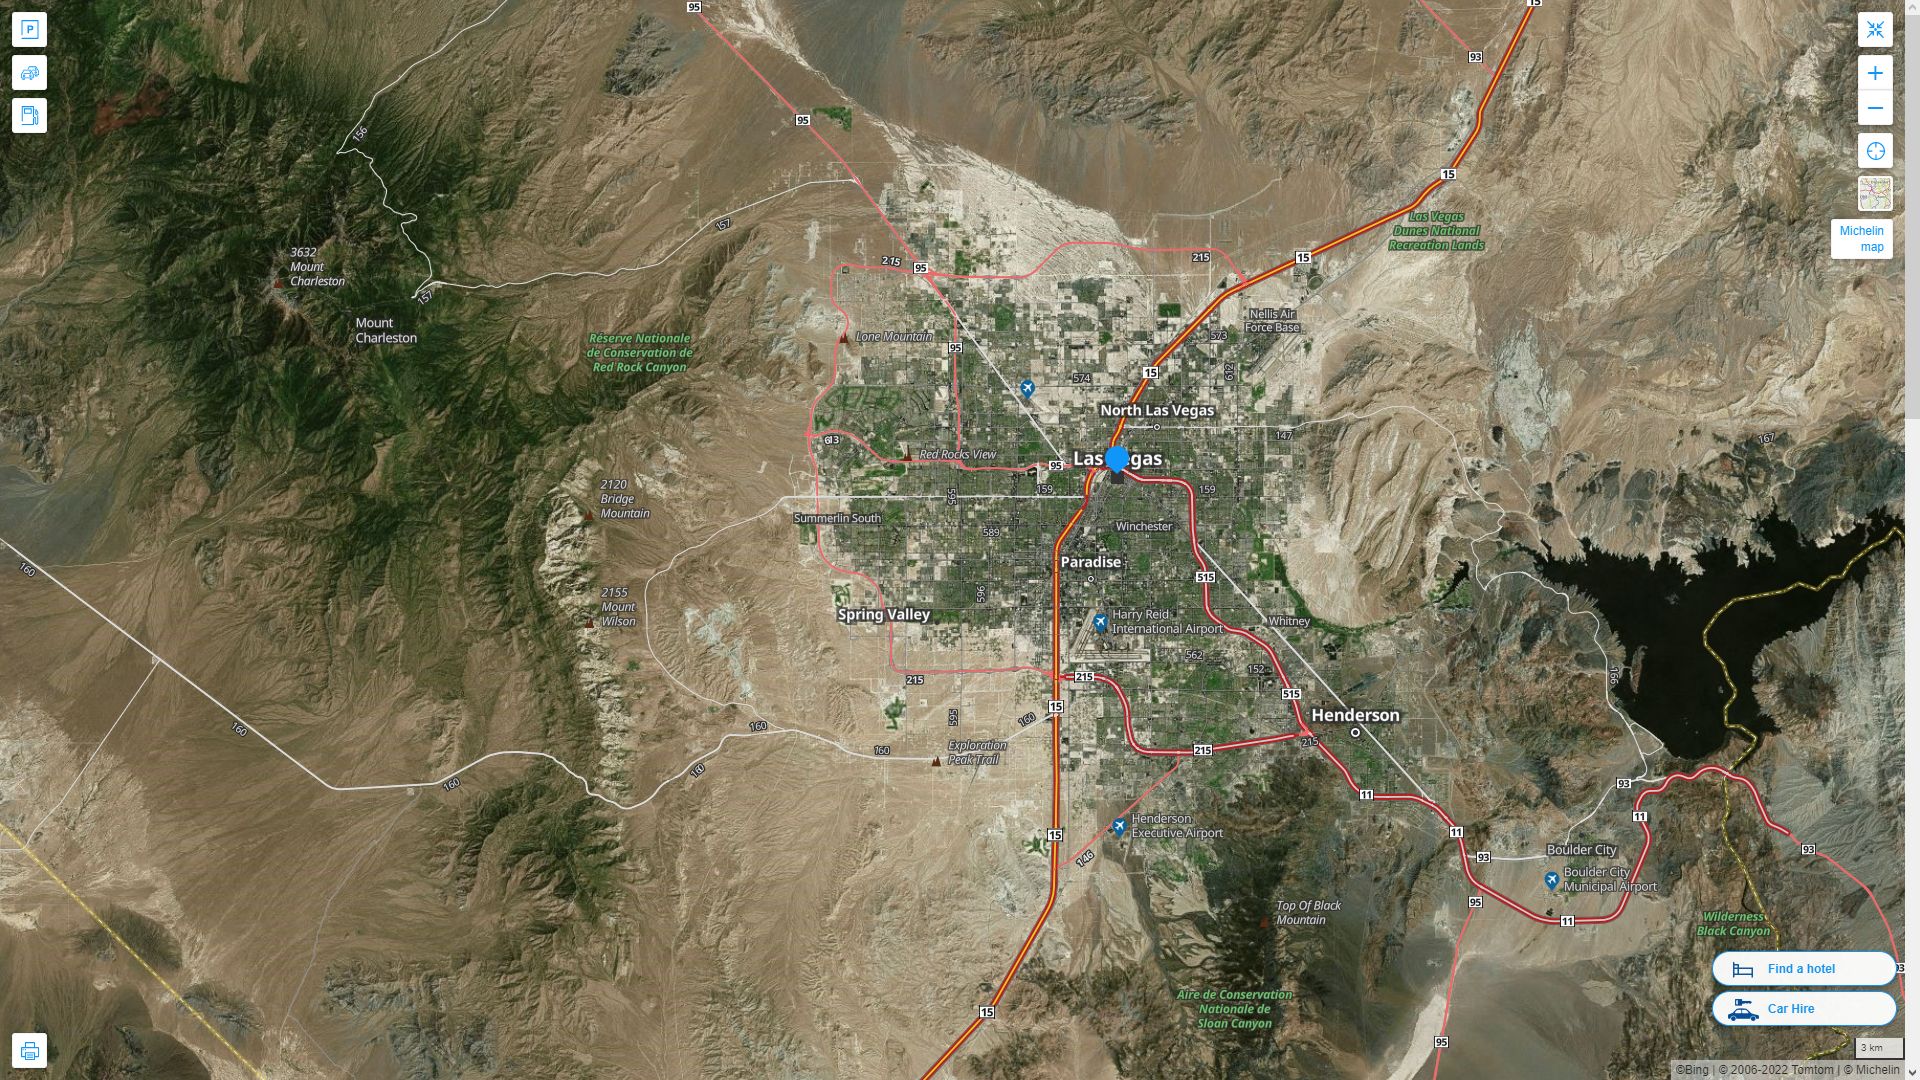 Las Vegas Nevada Highway and Road Map with Satellite View